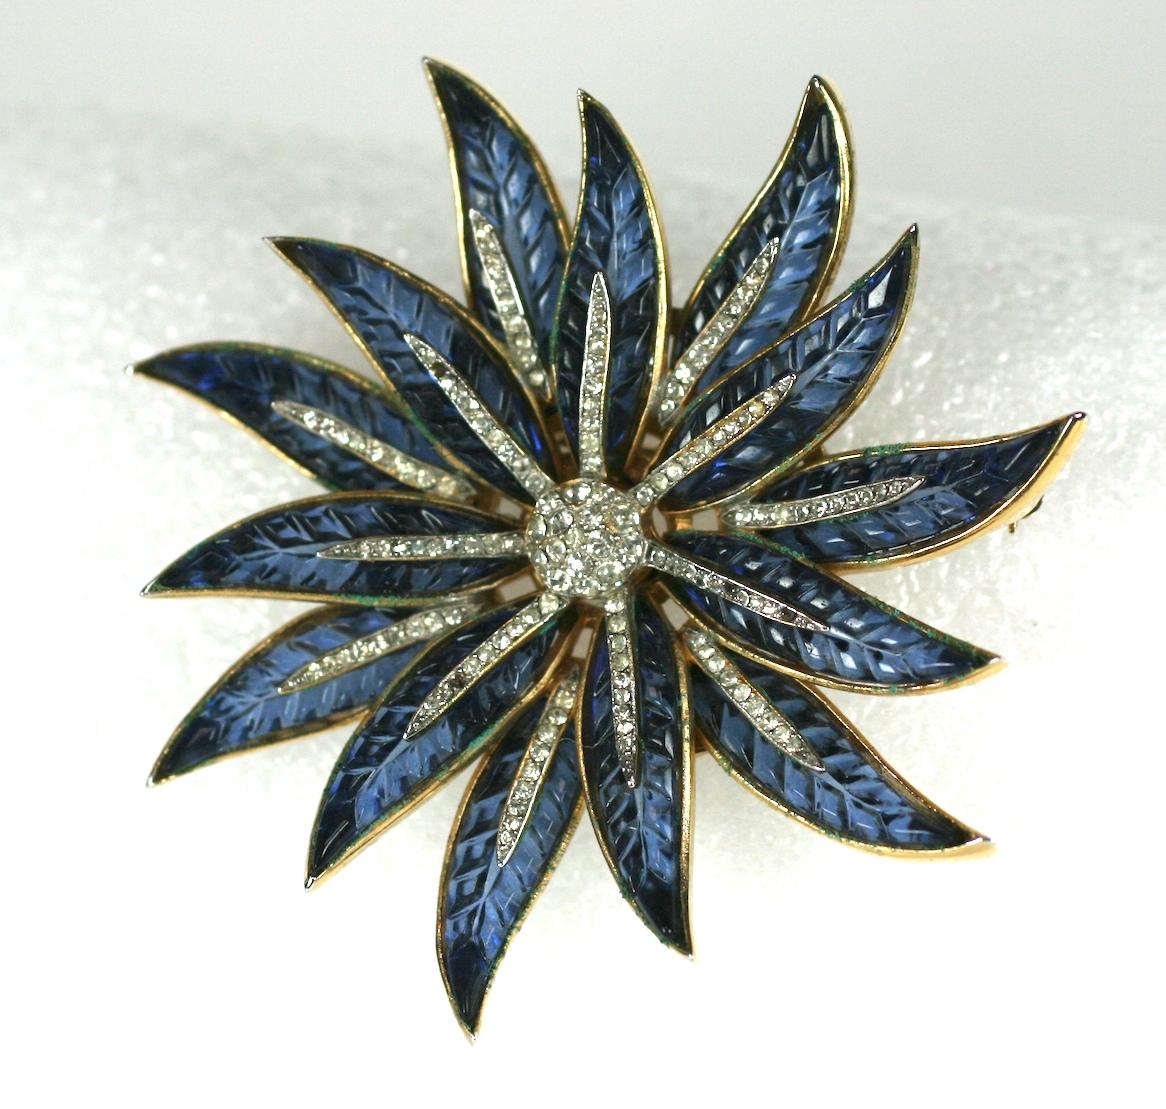 Super rare Trifari 'Alfred Philippe' Gold Pave and Invisibly Set Sapphire Poinsettia Star Flower Pin of gold plated base metal, rhinestones, faux invisibly set sapphires.
Marked: Trifari with Crown. Condition: Excellent
Size: 2.85